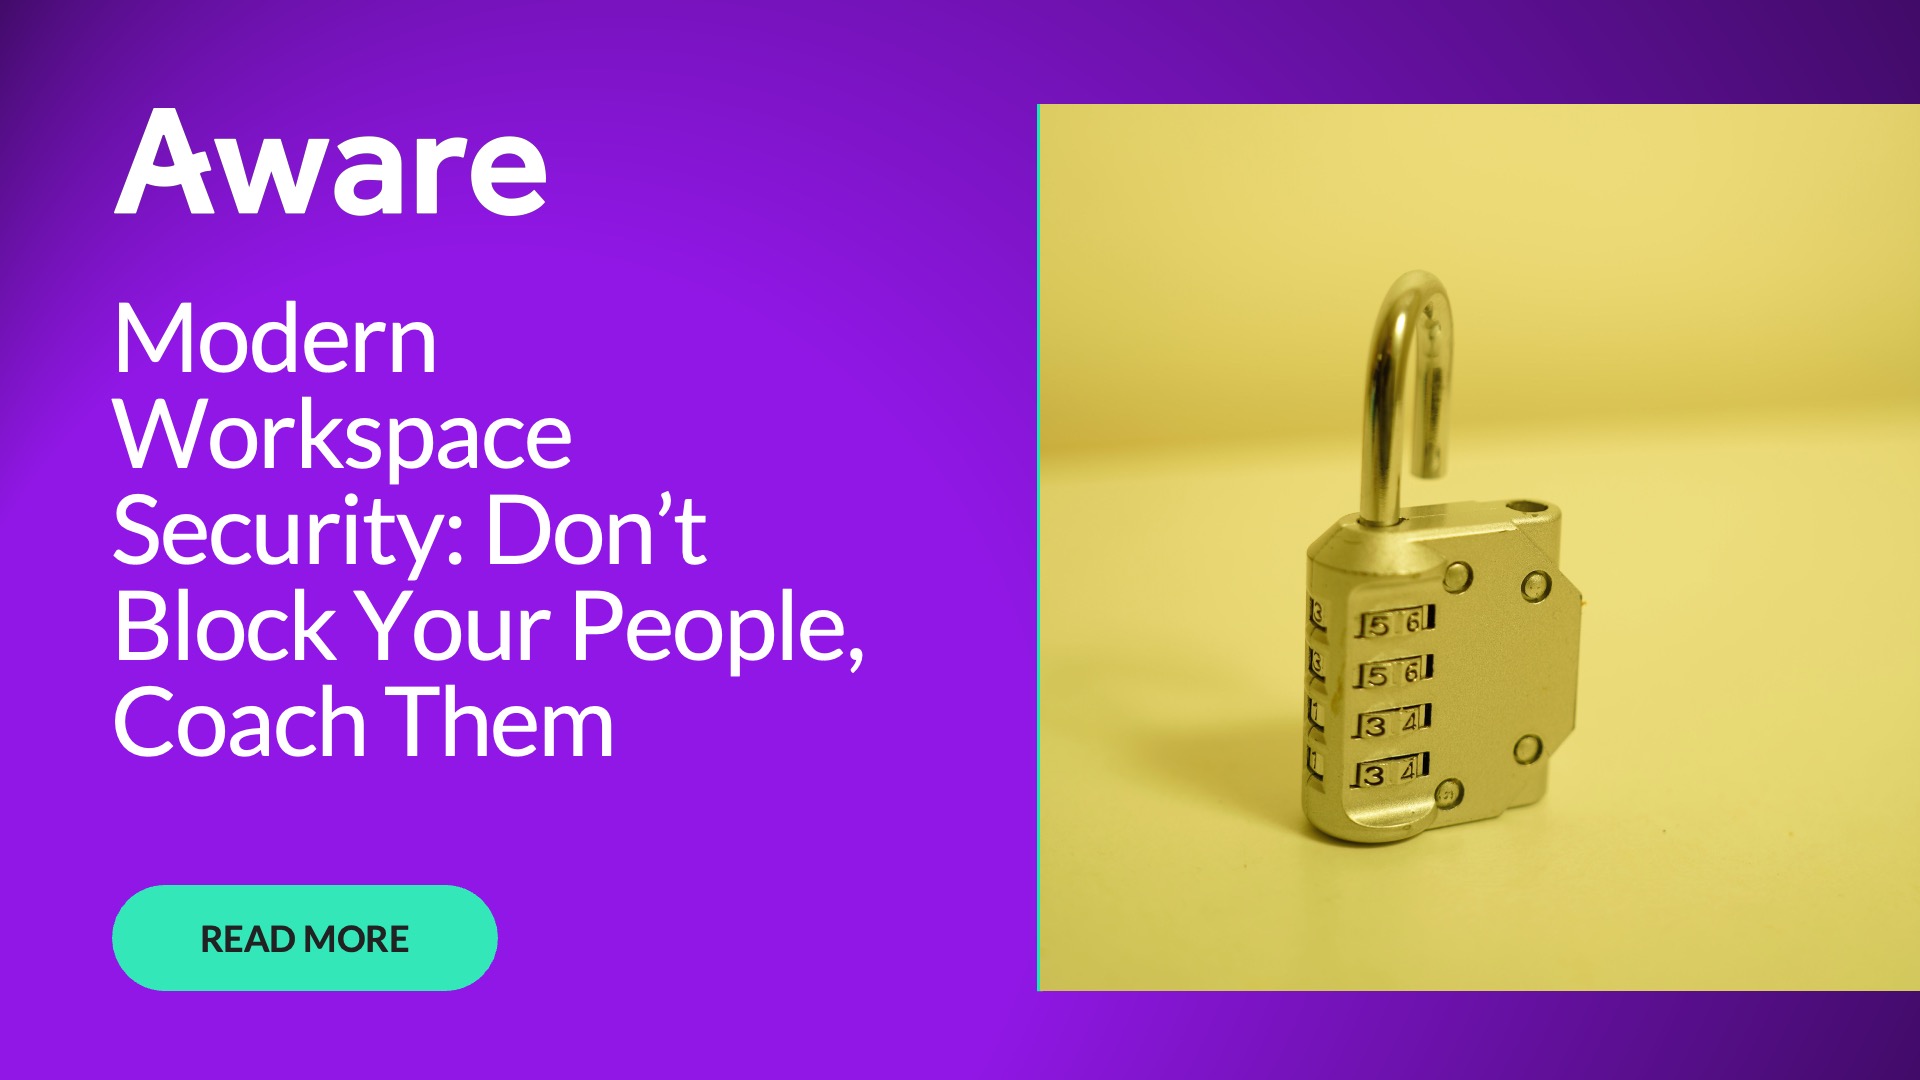 Modern Workspace Security: Don’t Block Your People, Coach Them